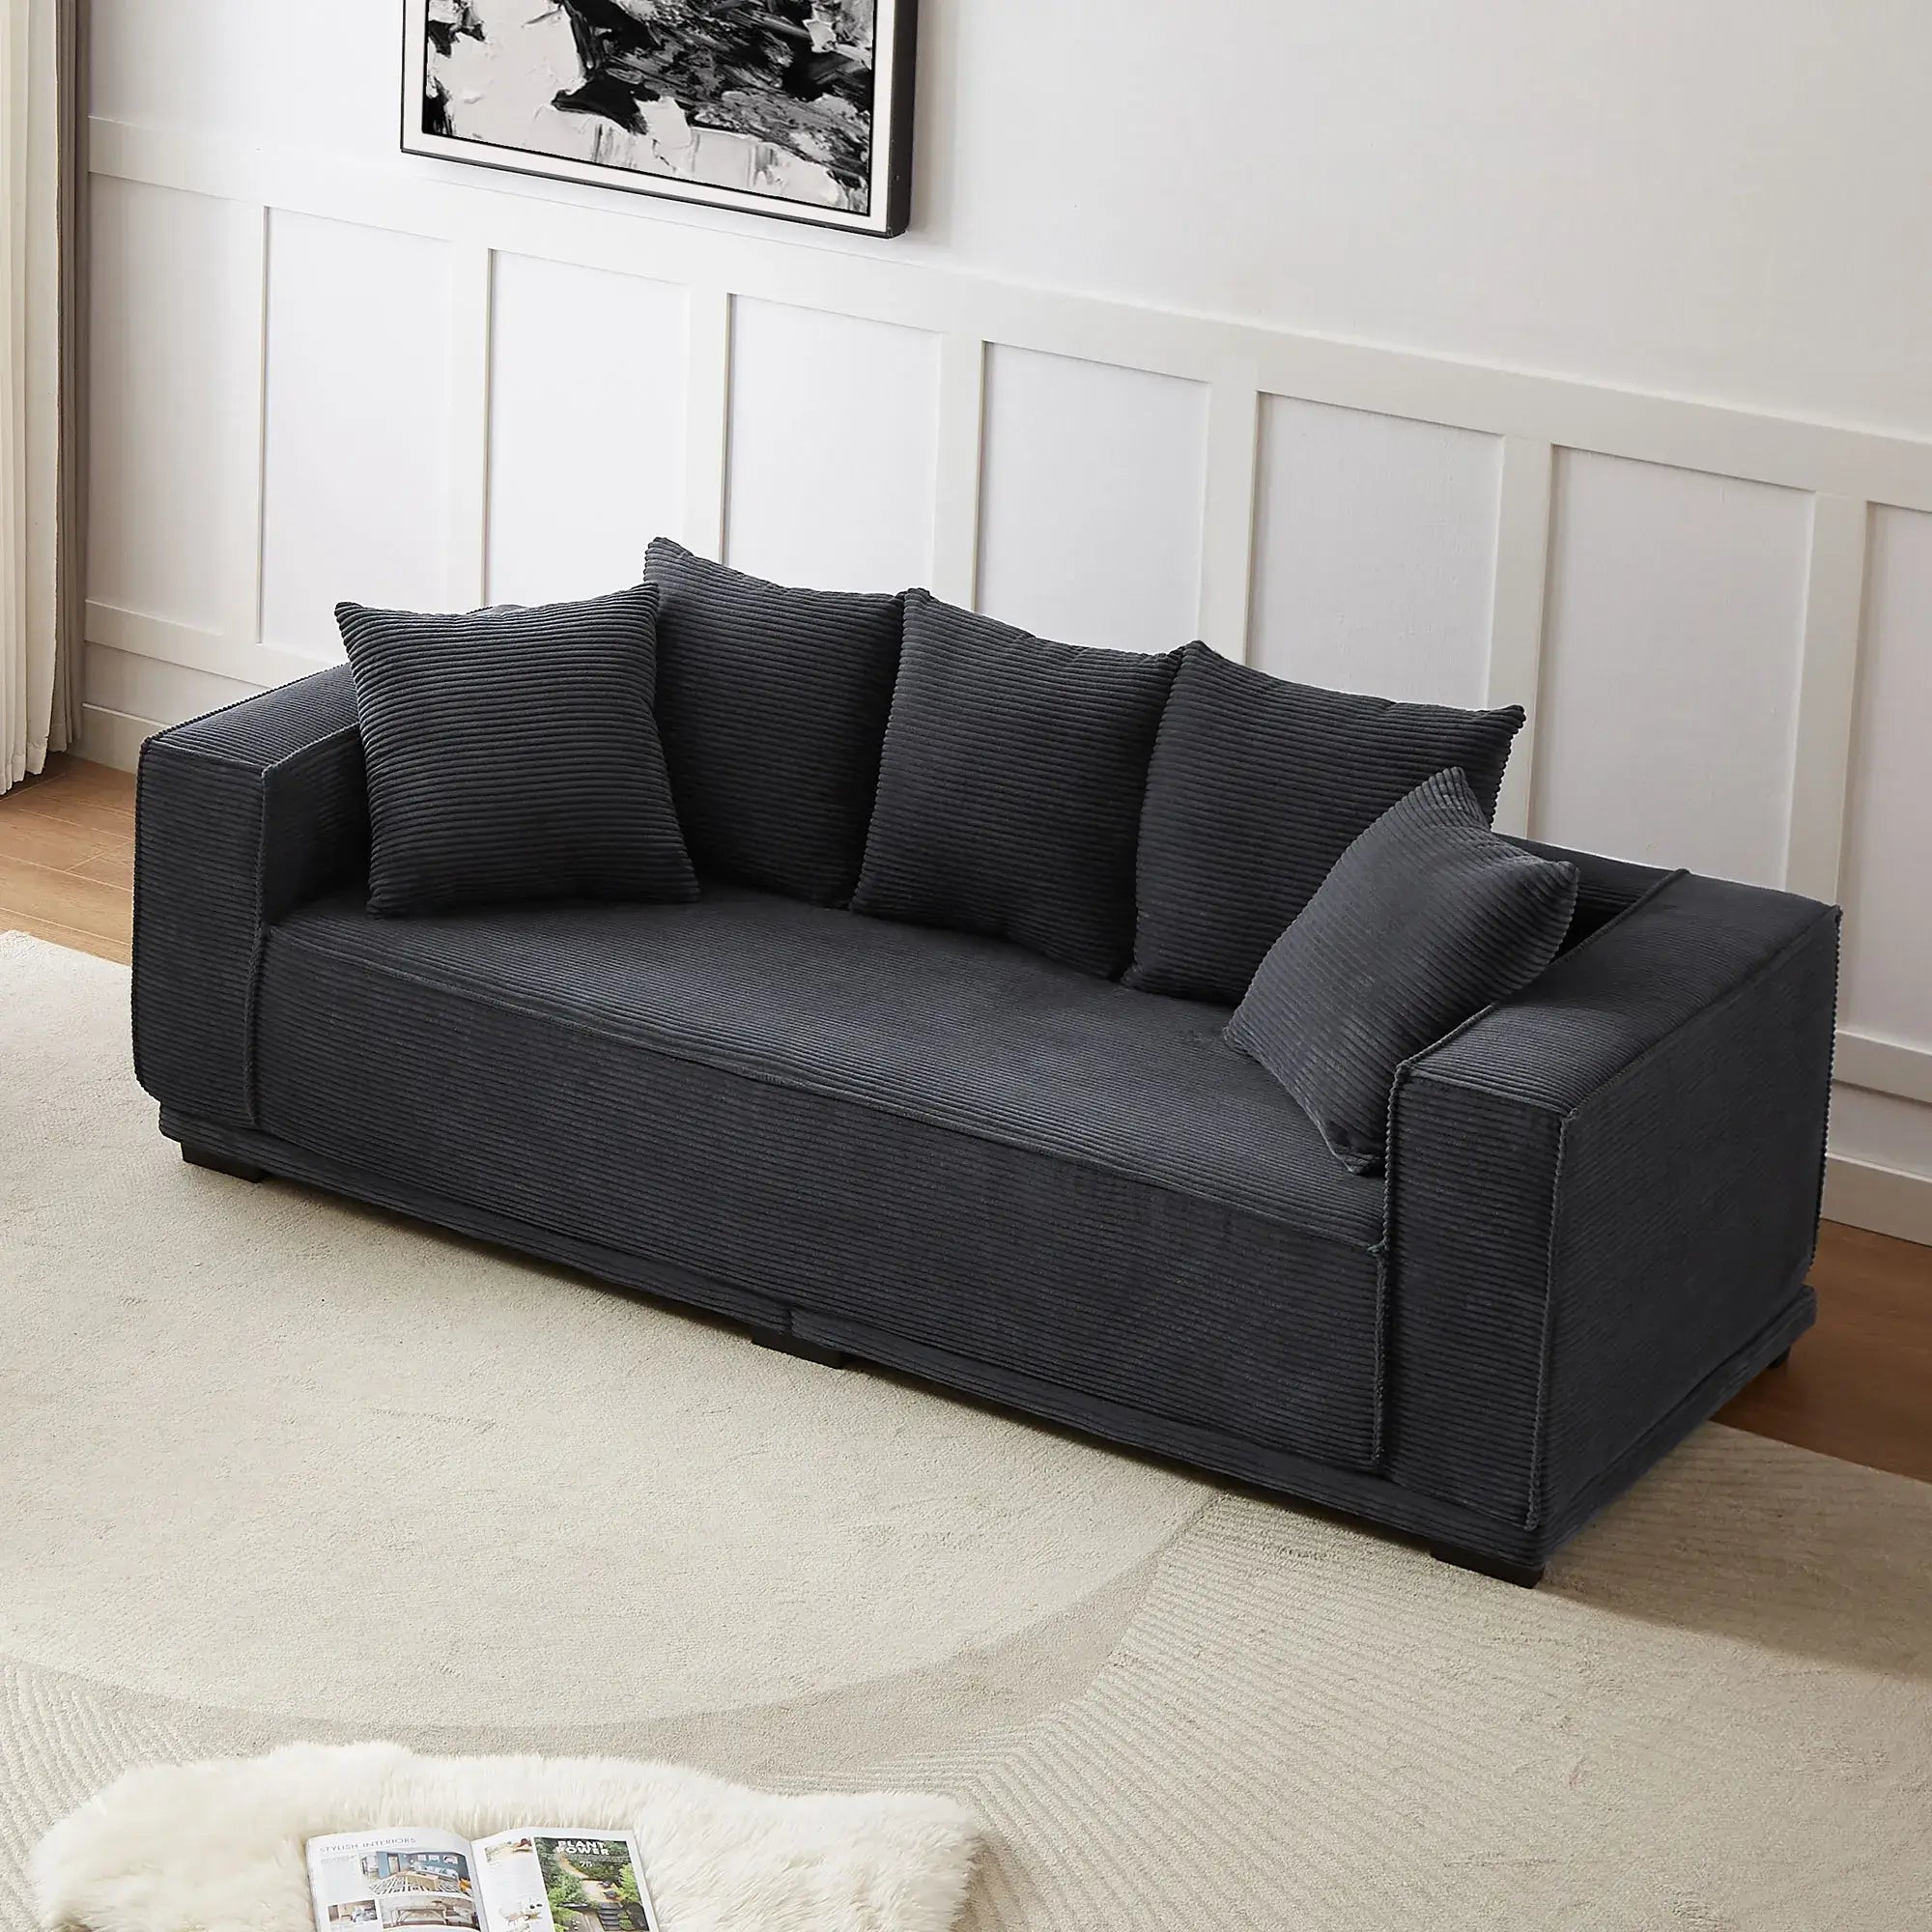 Louie Modern Corduroy Sofa, 3-Seater Couch for Living Room, Bedroom, Apartment in Black